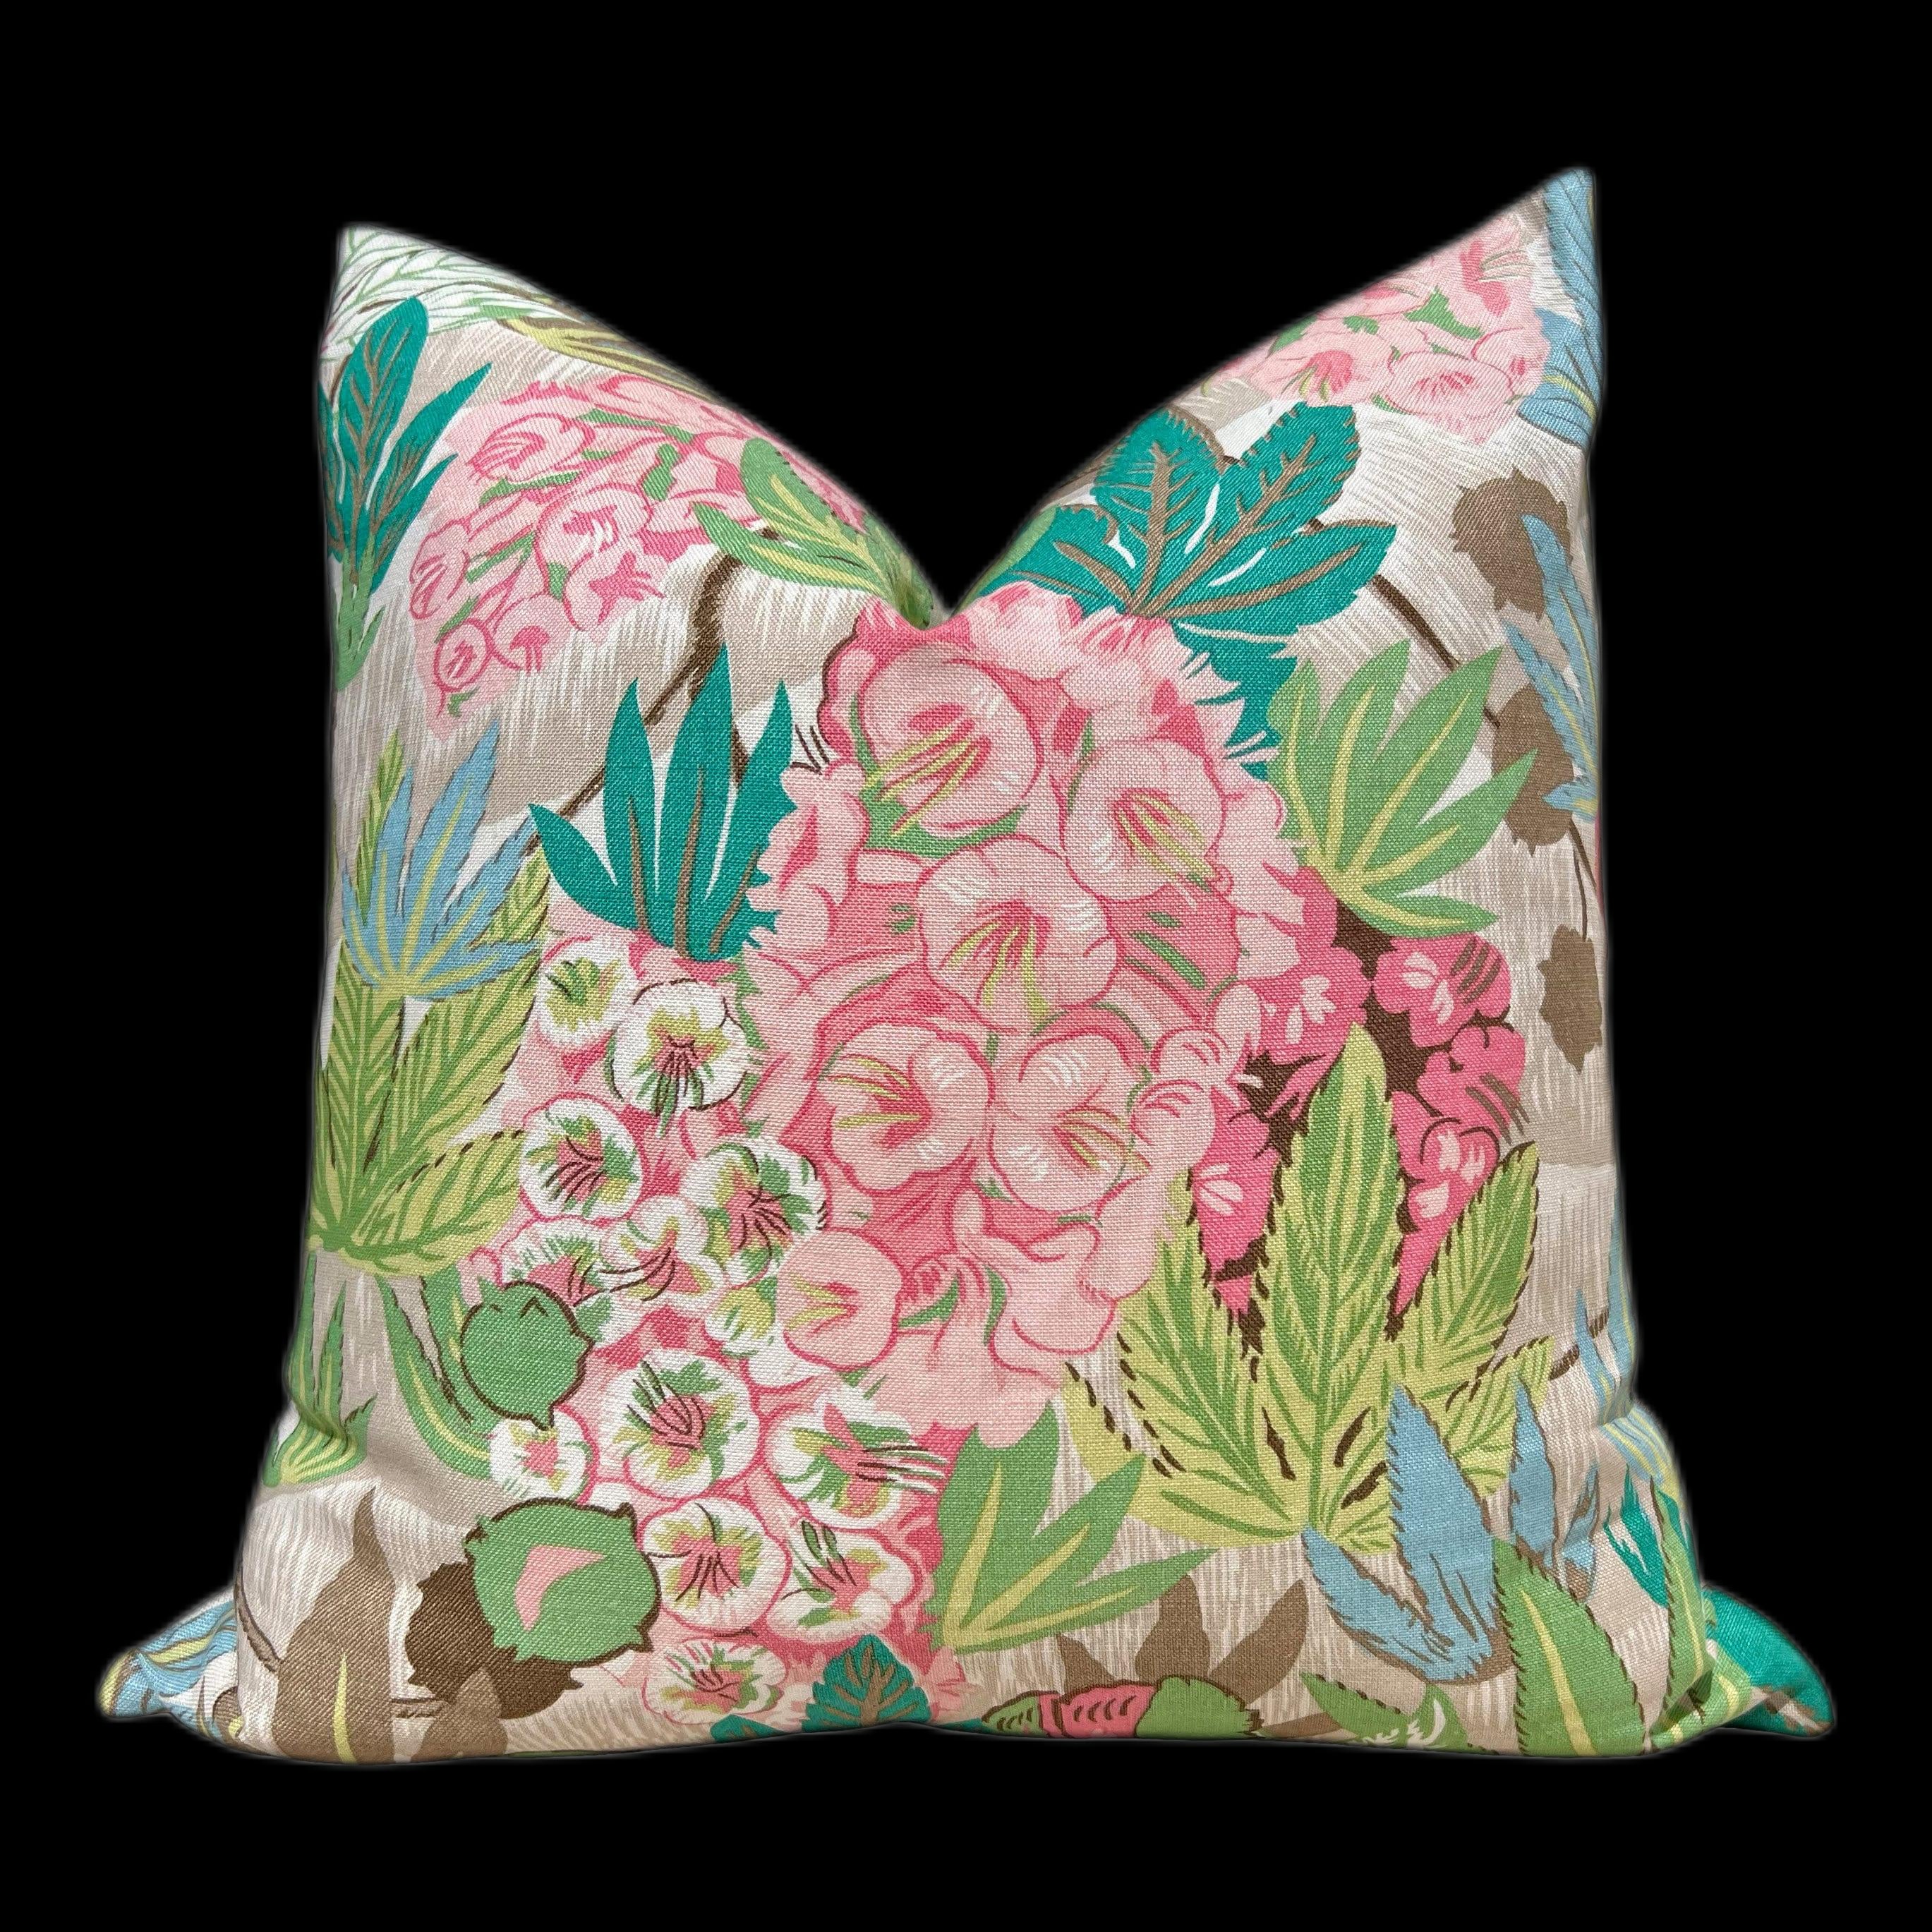 Del Lungo Exotic Floral Pillow Pink Teal Green. Tropical Blush Pillow Case, Designer Cushion Cover, Euro Sham Slipcover, Lumbar Pillow